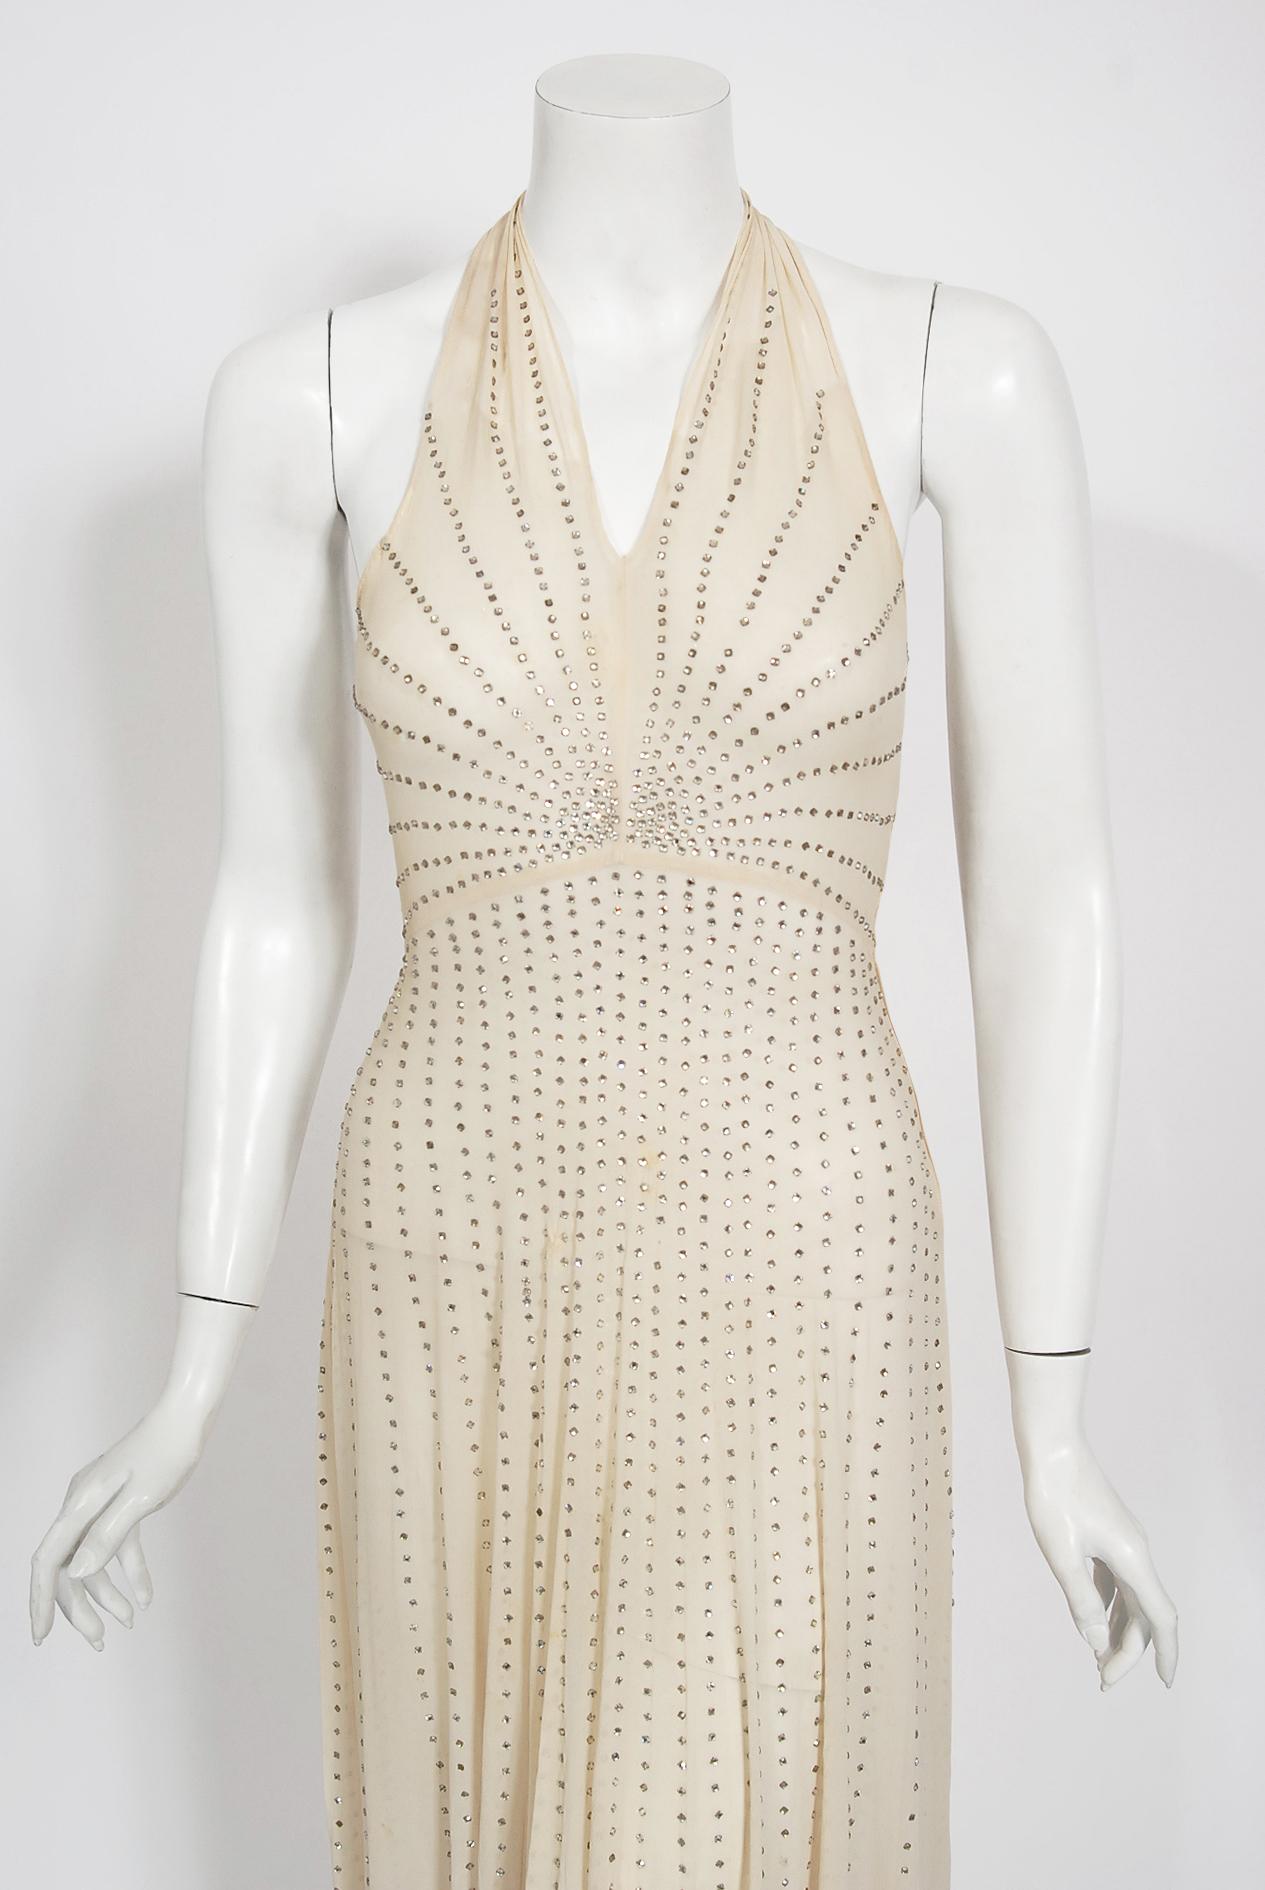 A breathtaking ivory sheer silk chiffon gown dating back to the late 1930's Old Hollywood era of glamour. So Ginger Rodgers! I have never seen such a romantic design; hundreds of sparkling prong-set rhinestones in an alluring deco motif. The bodice